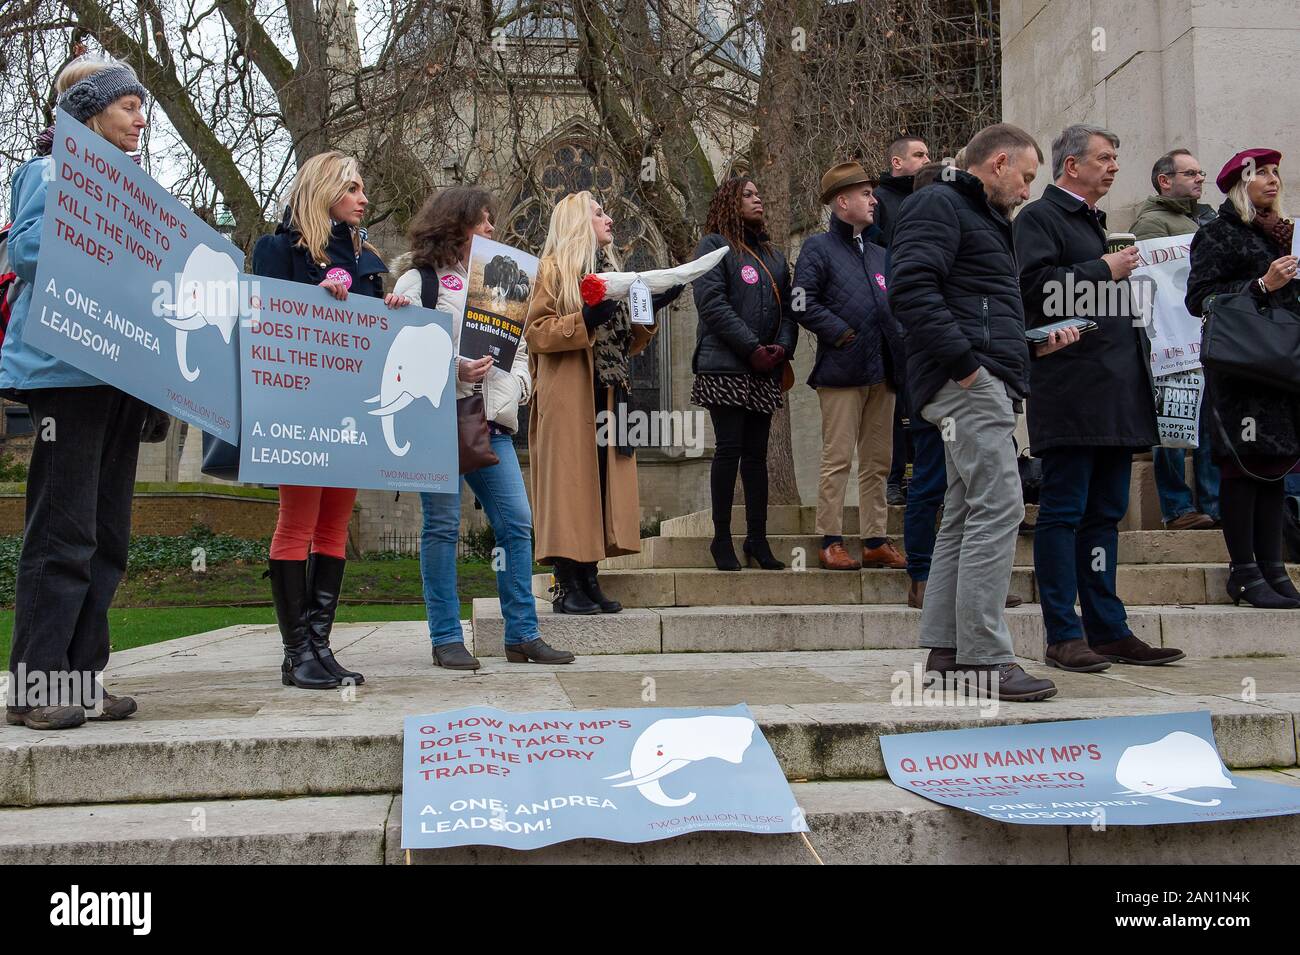 Action for Elephants, UK Ban All Ivory Trade Protest, Westminster, London, UK. 6th February, 2017. Protesters outside Parliament call on the Prime Minister and MPs to ban all ivory trade in the UK. Credit: Maureen McLean/Alamy Stock Photo